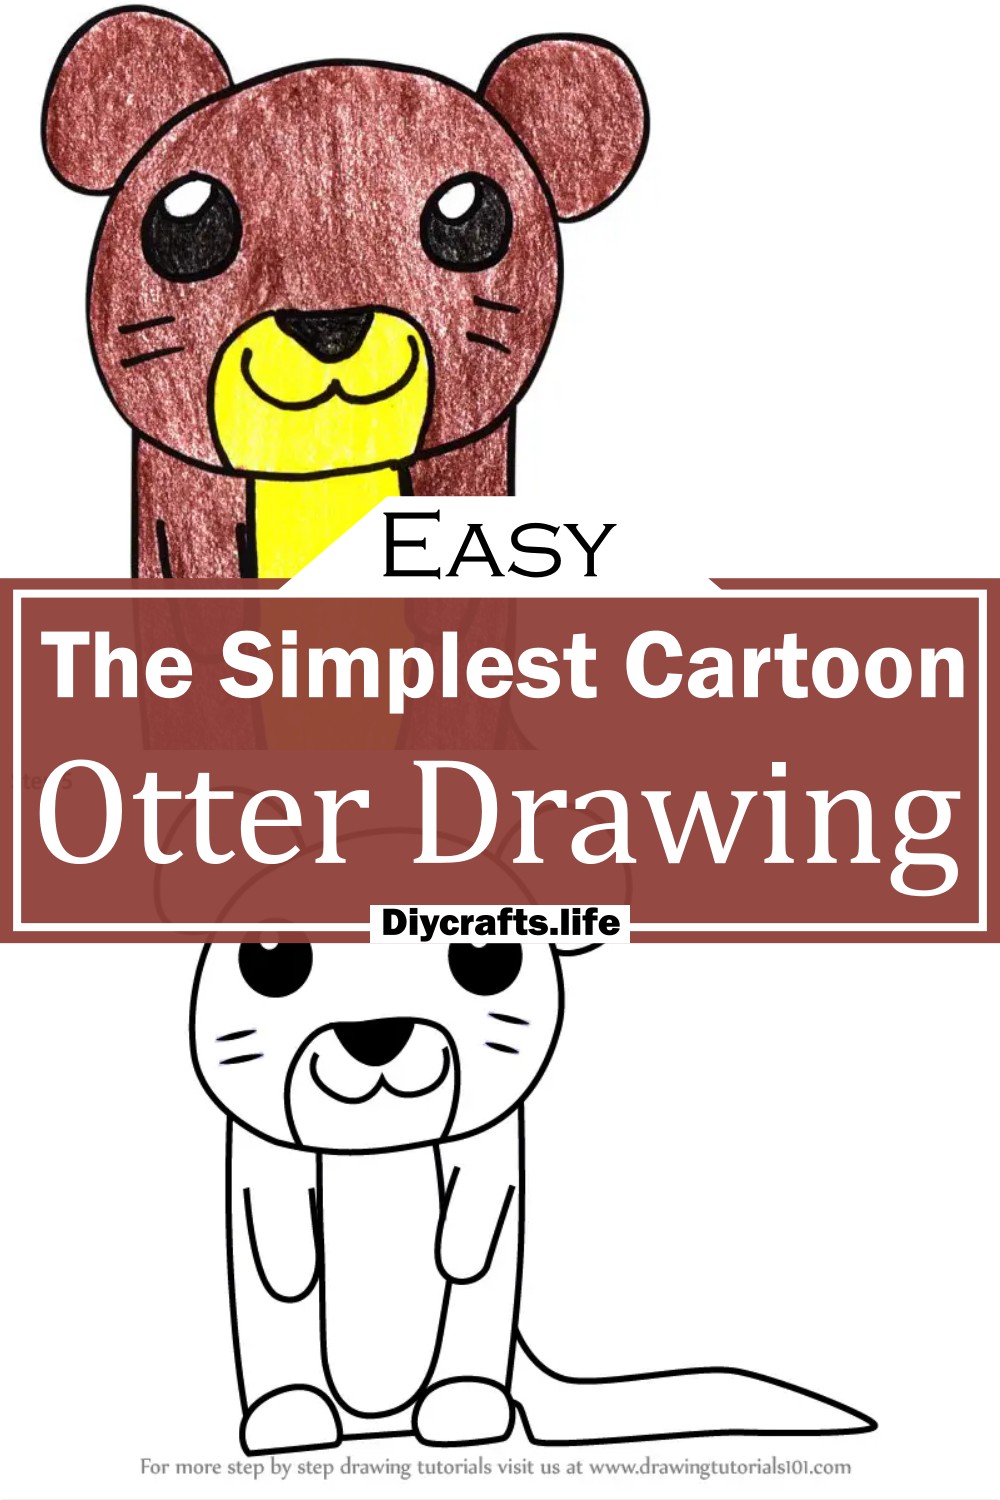 The Simplest Cartoon Otter Drawing